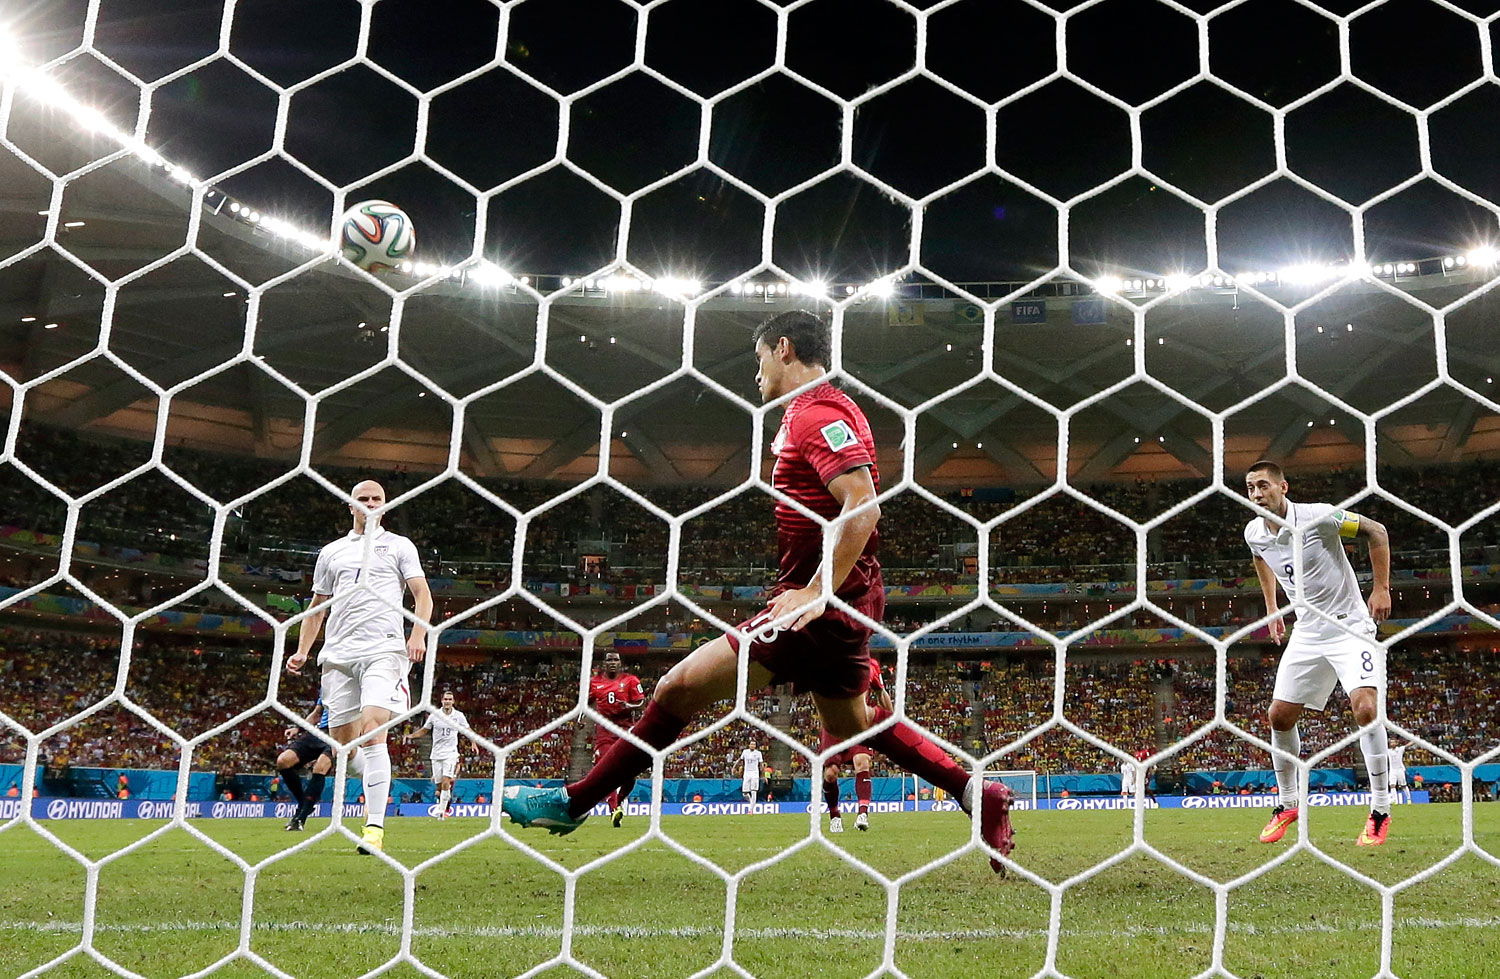 Portugal's Ricardo Costa deflects a ball before it crosses the line.